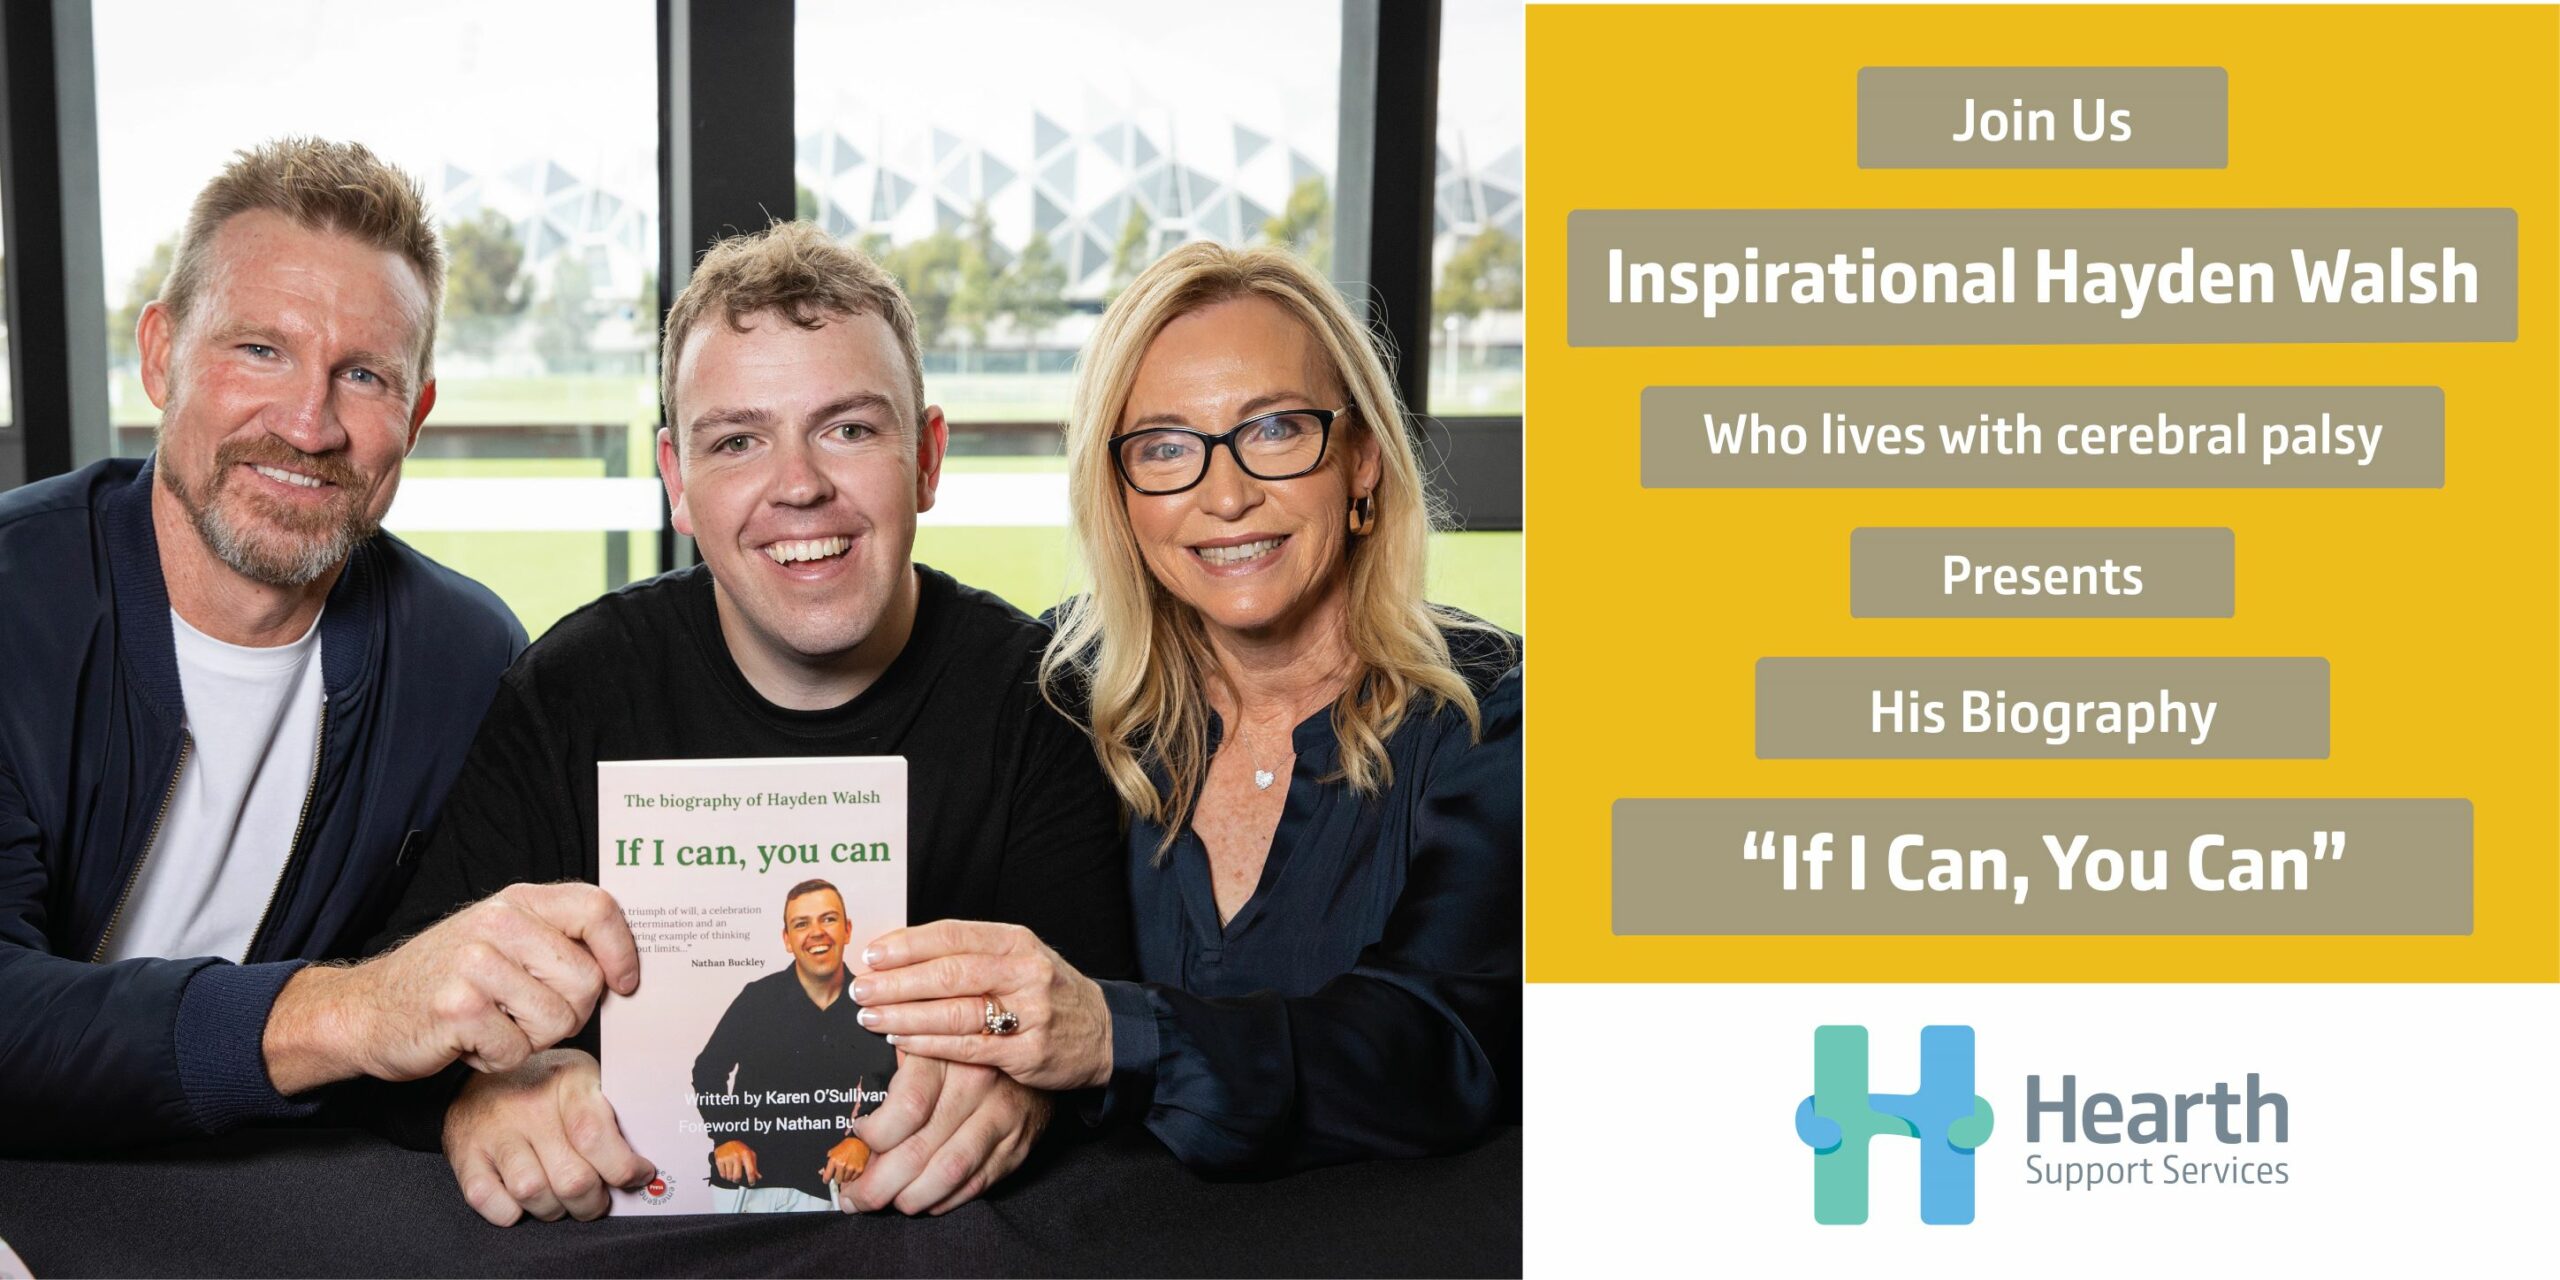 Inspirational Hayden Walsh Presents His Biography Online “If I Can, You Can”